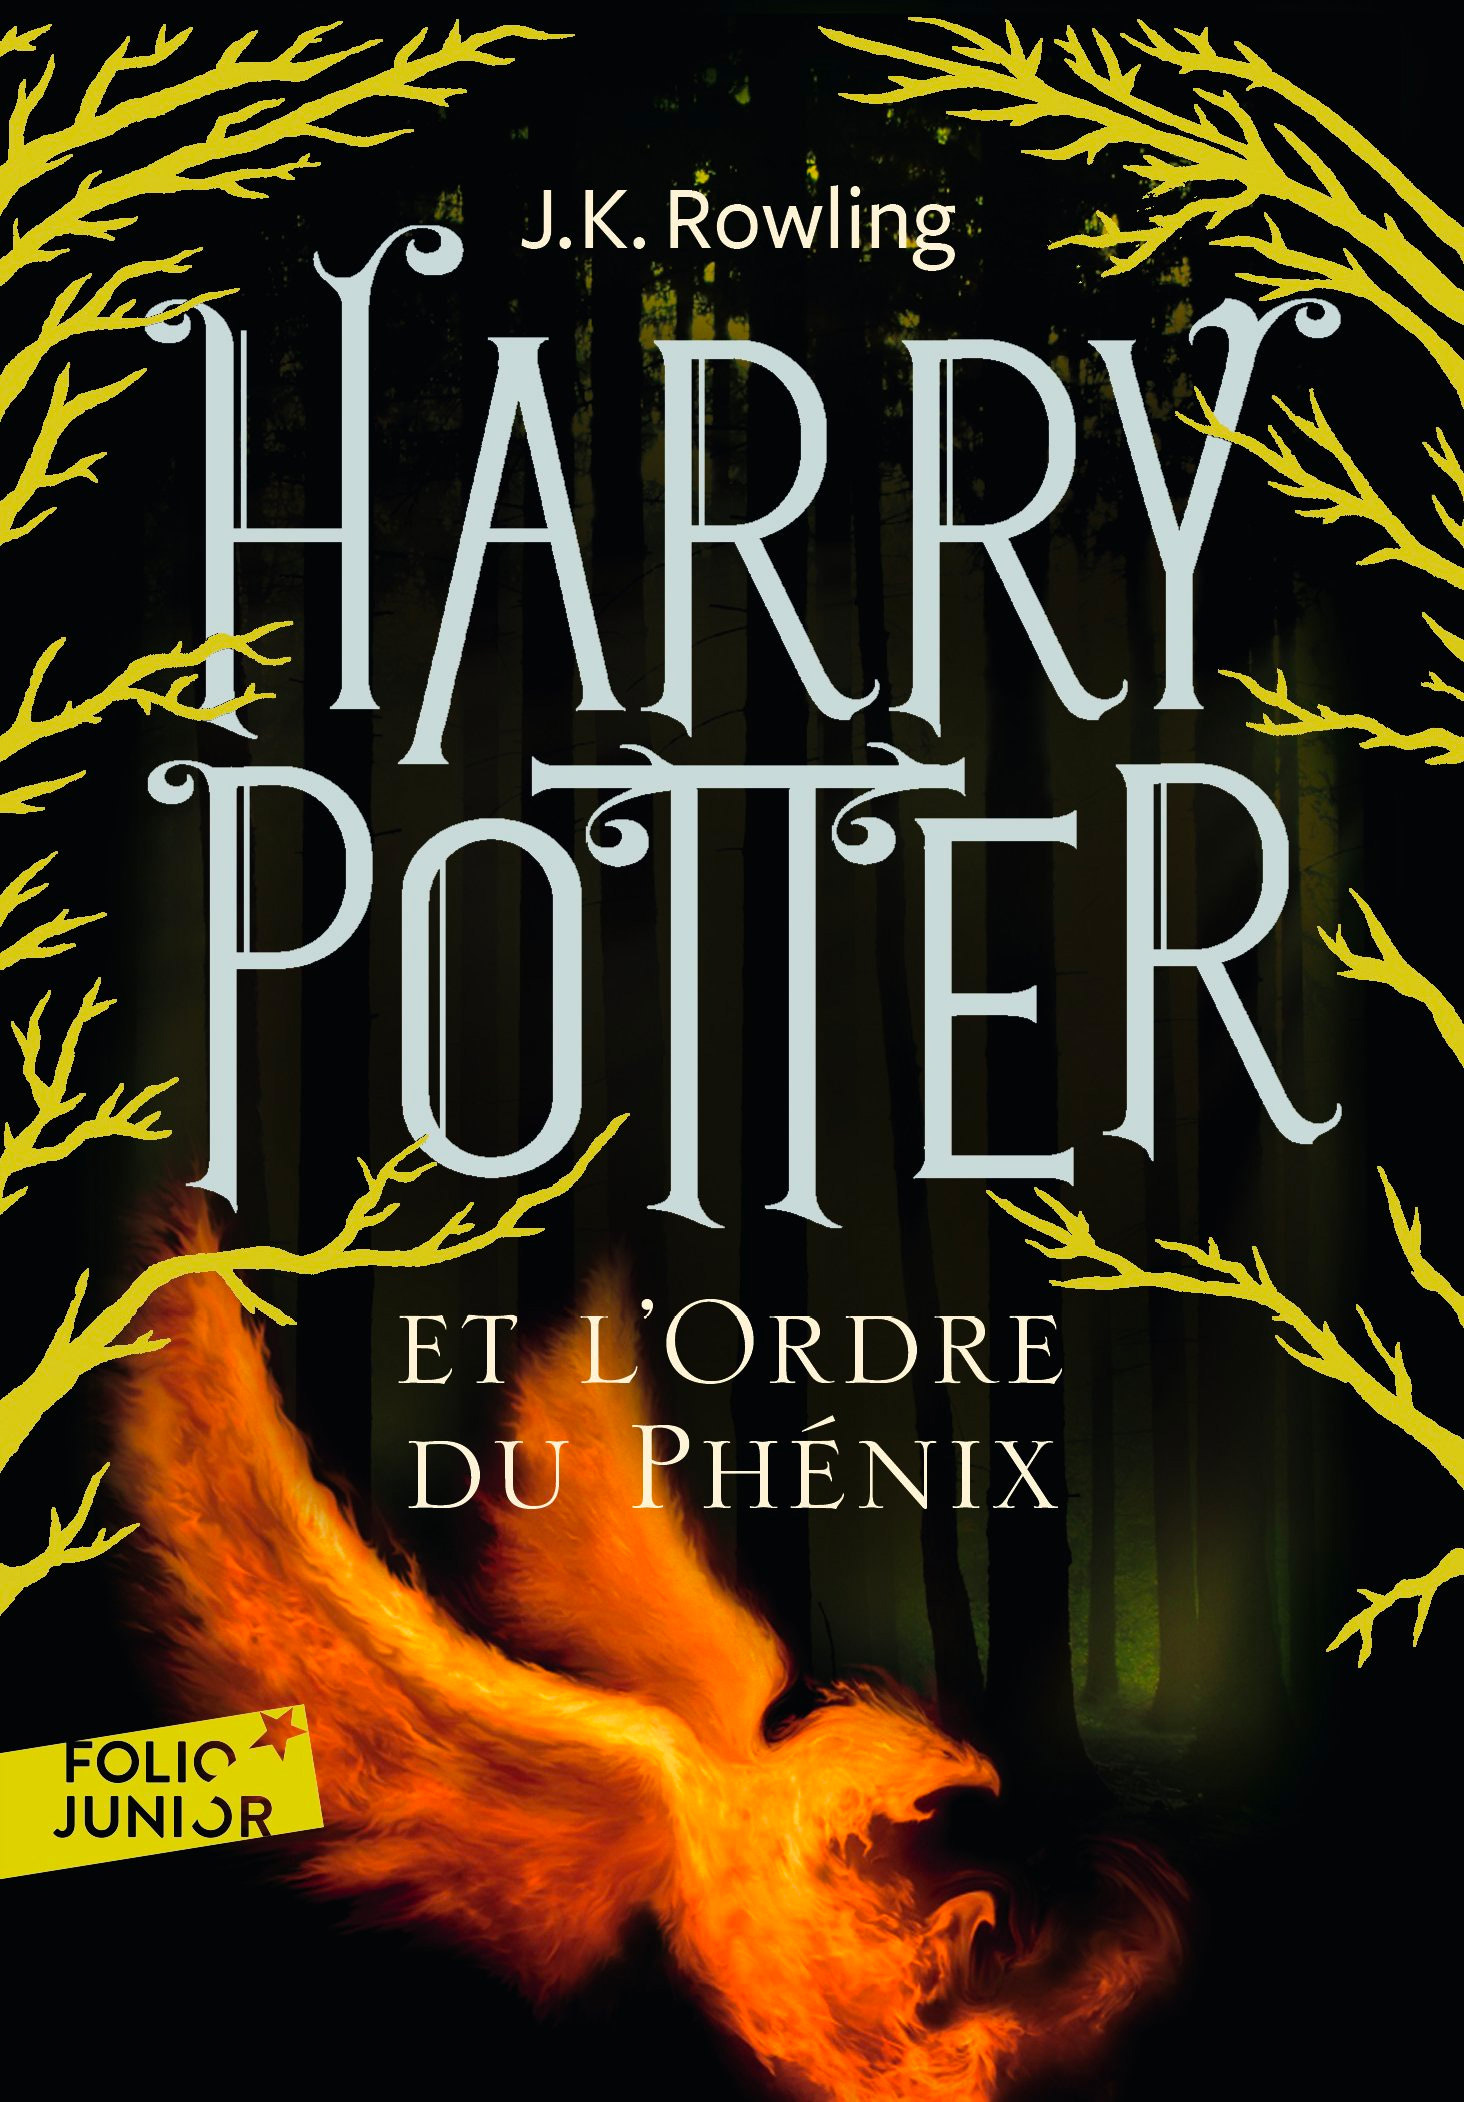 ‘Order of the Phoenix’ French adult edition